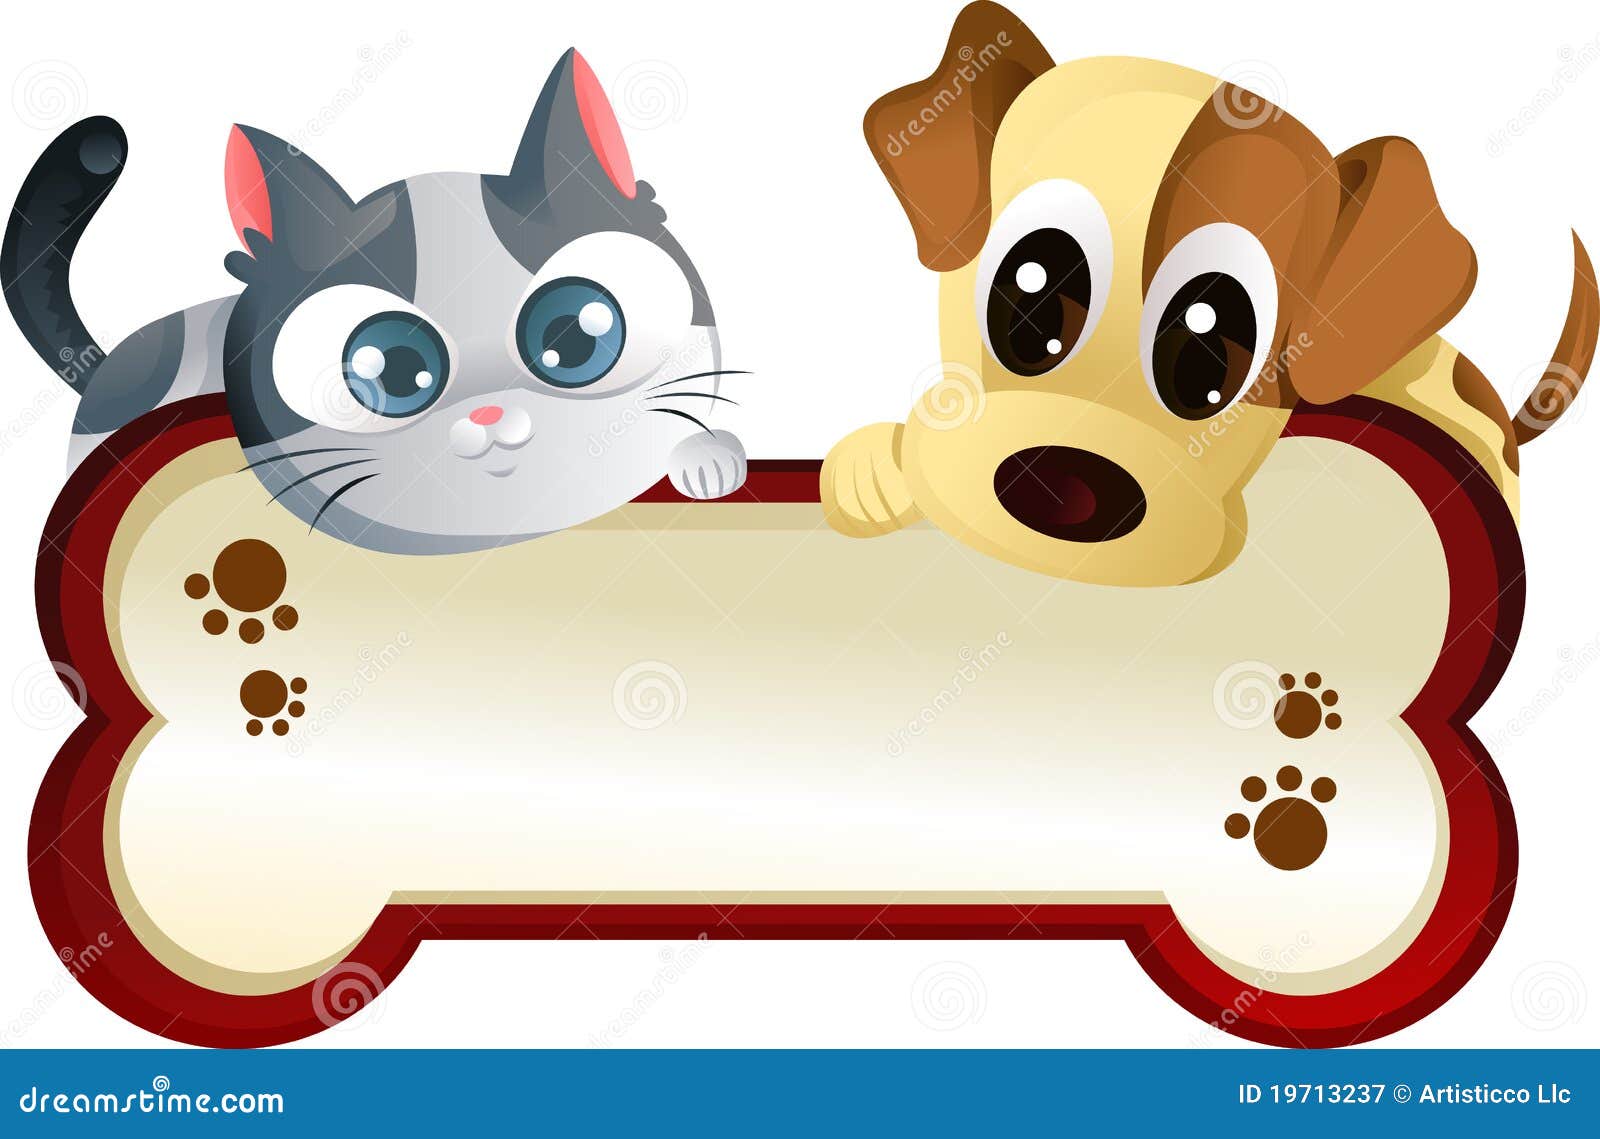 clip art free dogs and cats - photo #31